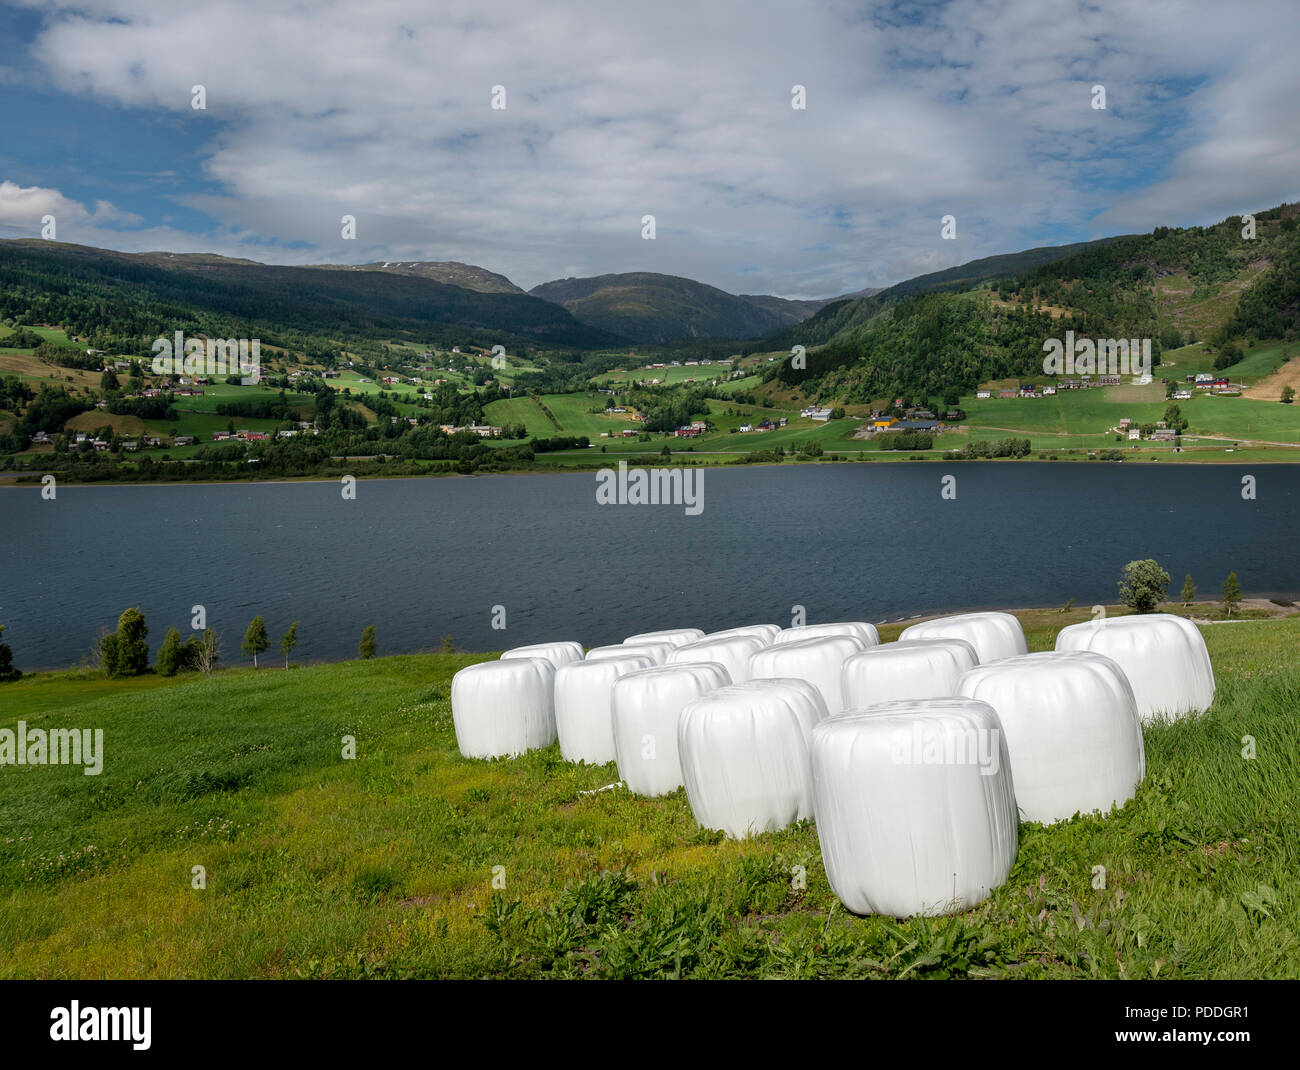 Hay bales wrapped in white plastic in a field, Norway Stock Photo